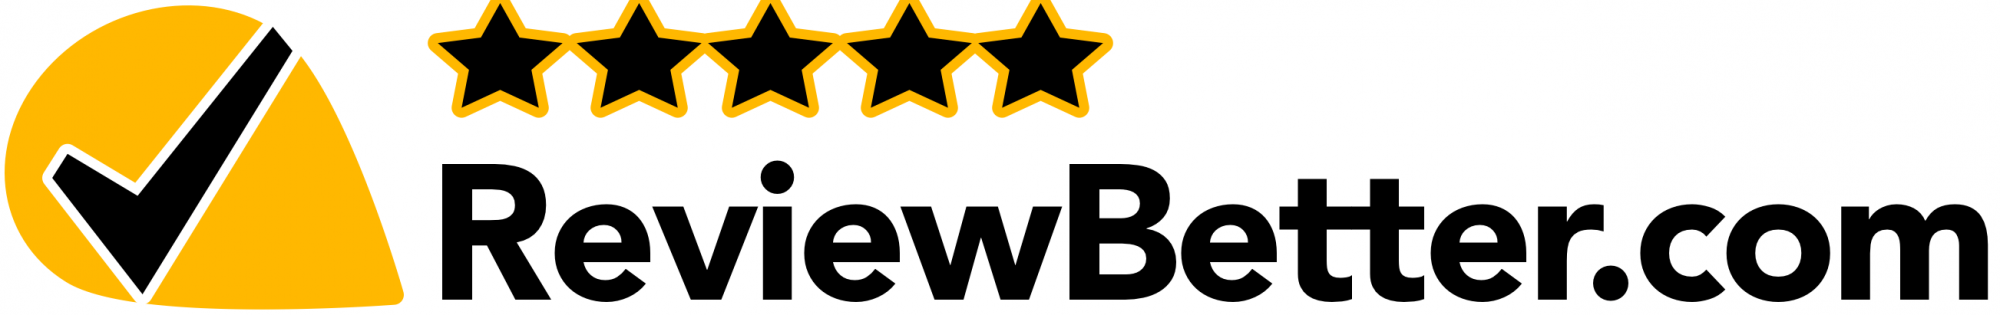 cropped-reviewbetter_logo.png